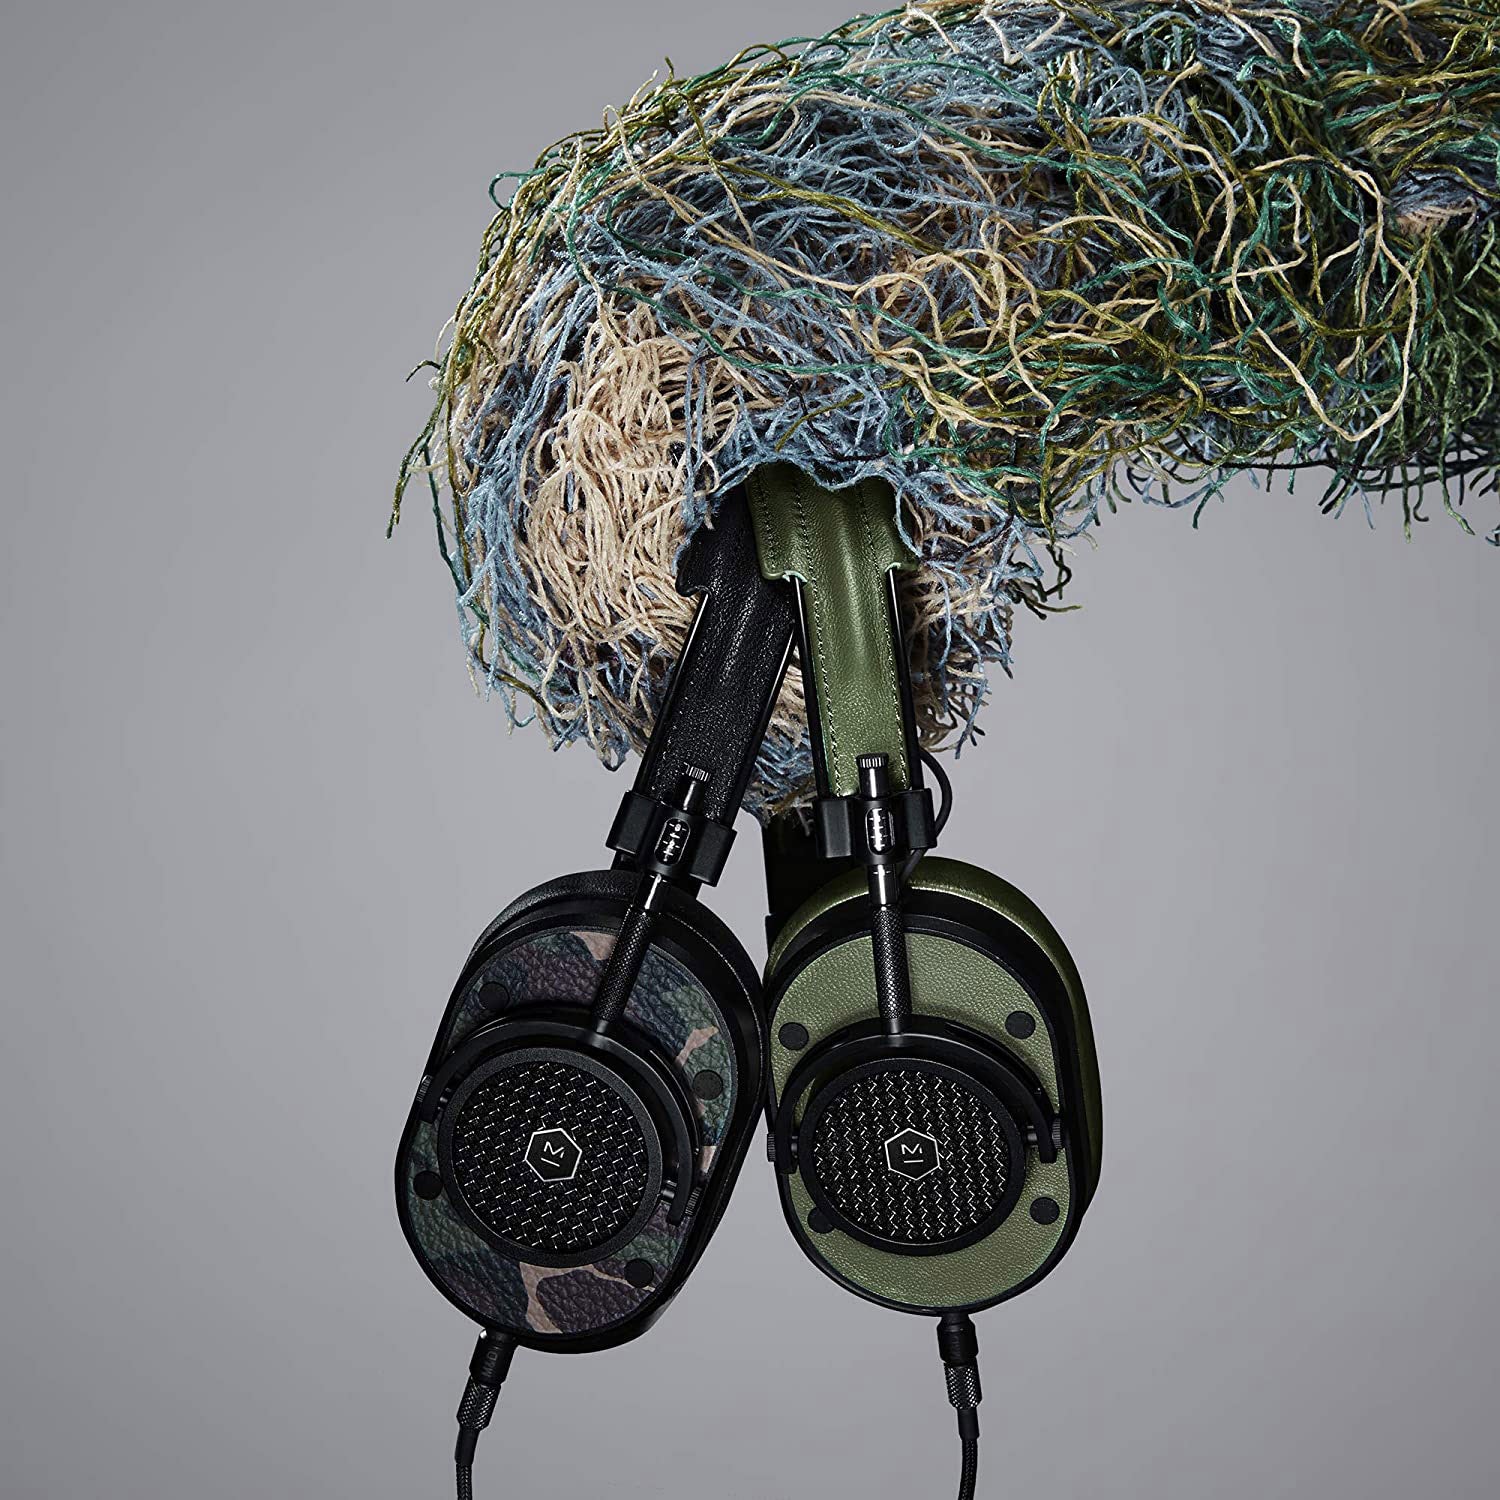 Master & Dynamic MH40 Wired Over Ear Headphones Black/Camo MKX8HV104E |28032|